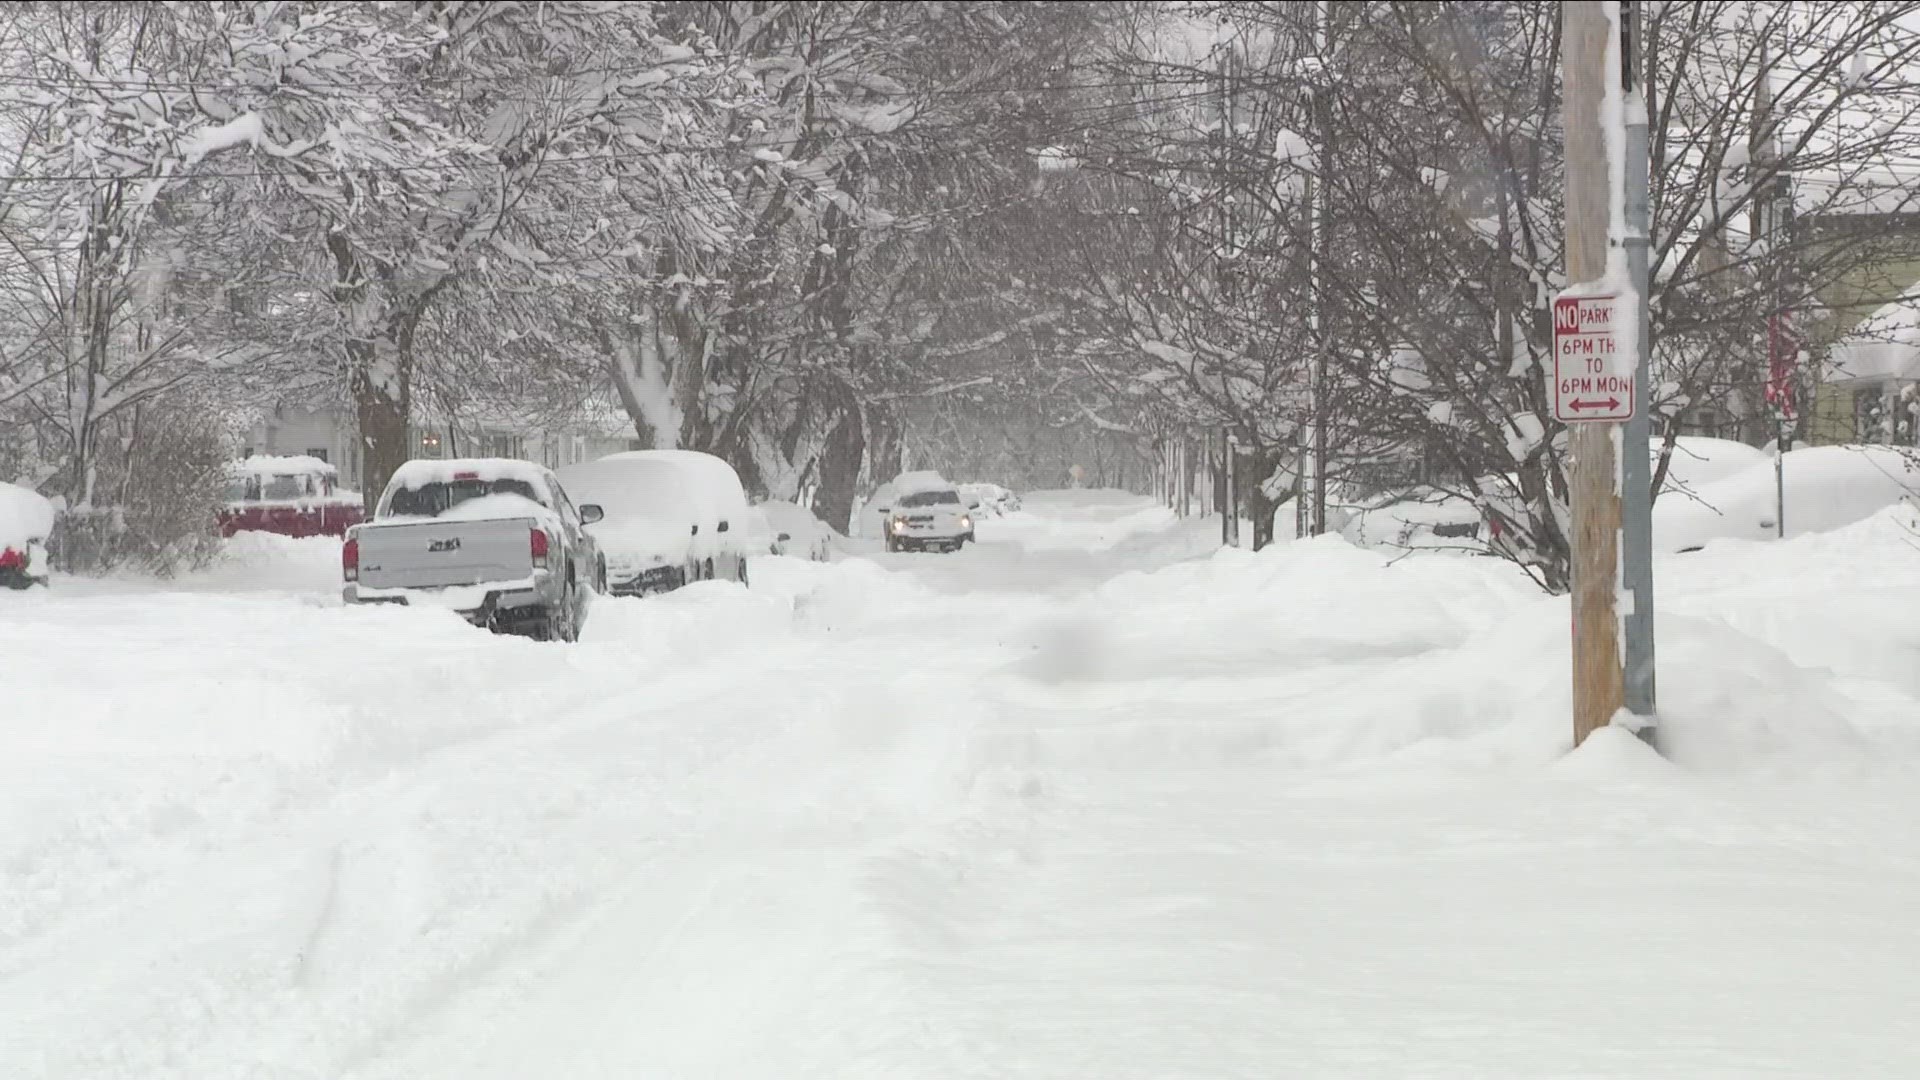 Buffalo Area Hammered By More Snow - Videos from The Weather Channel